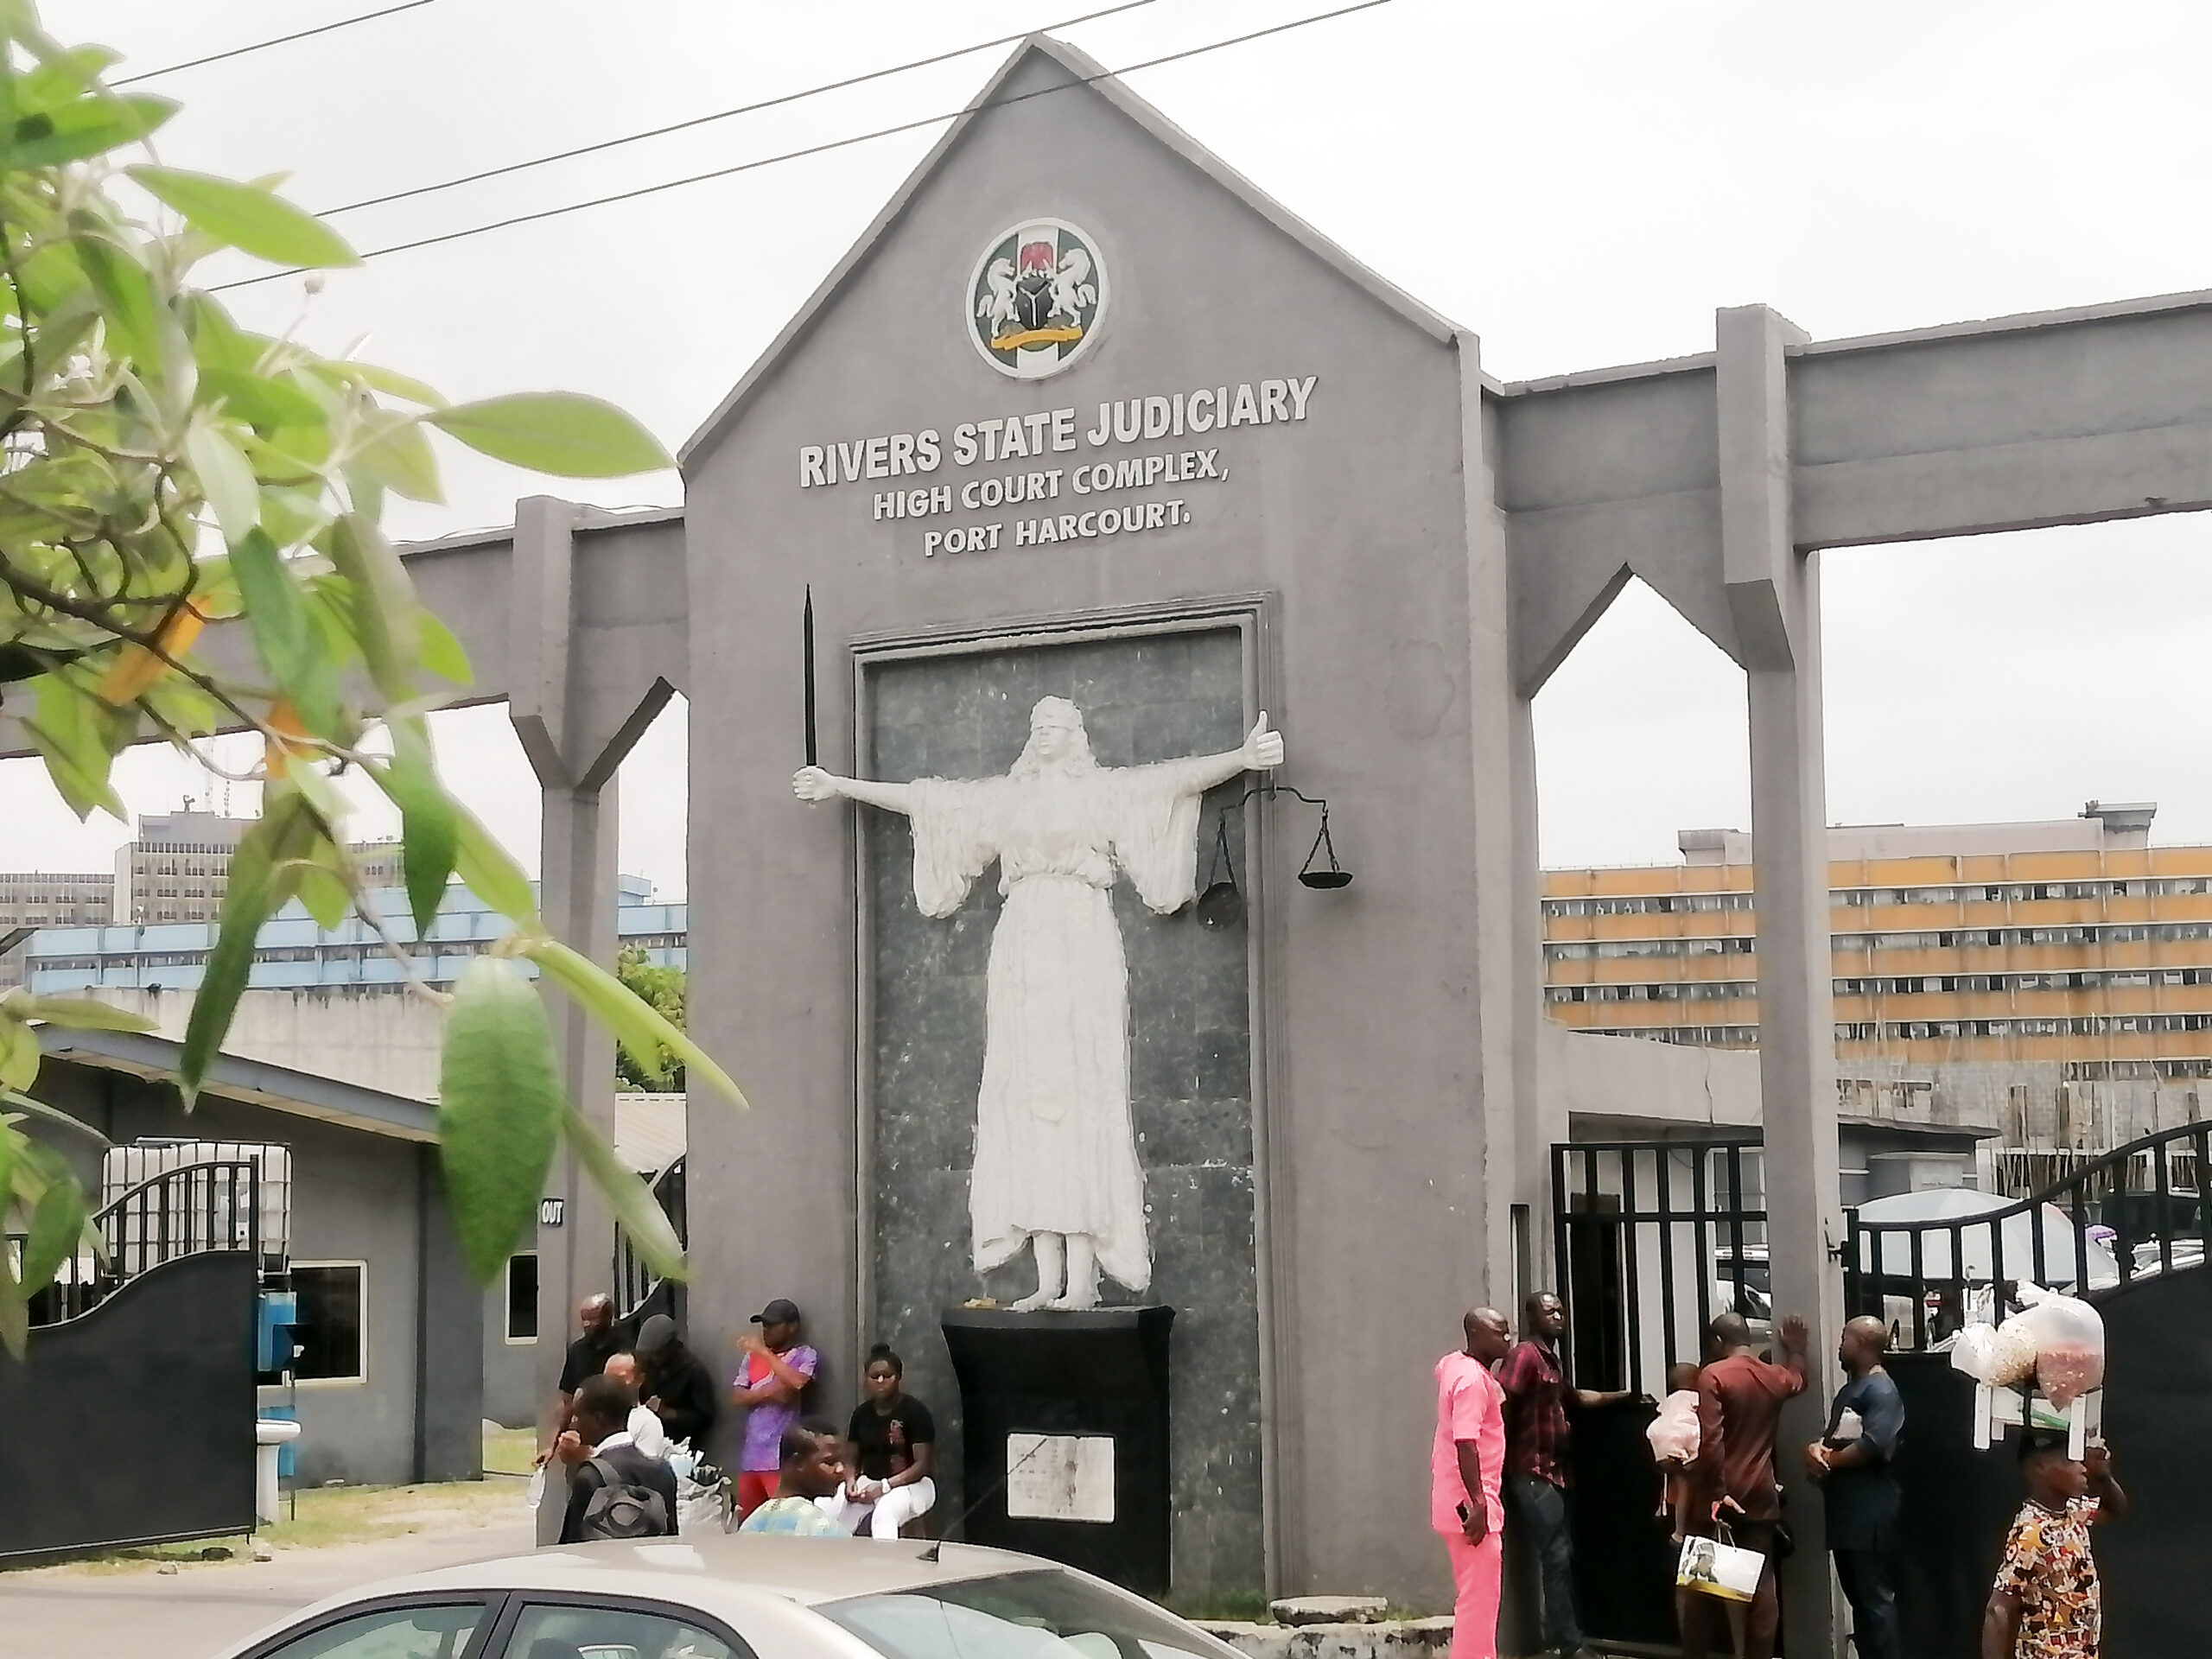 Entrance to the Rivers State Judiciary's High Court Complex in Port Harcourt, Nigeria. (Photo by Mike Daemon)